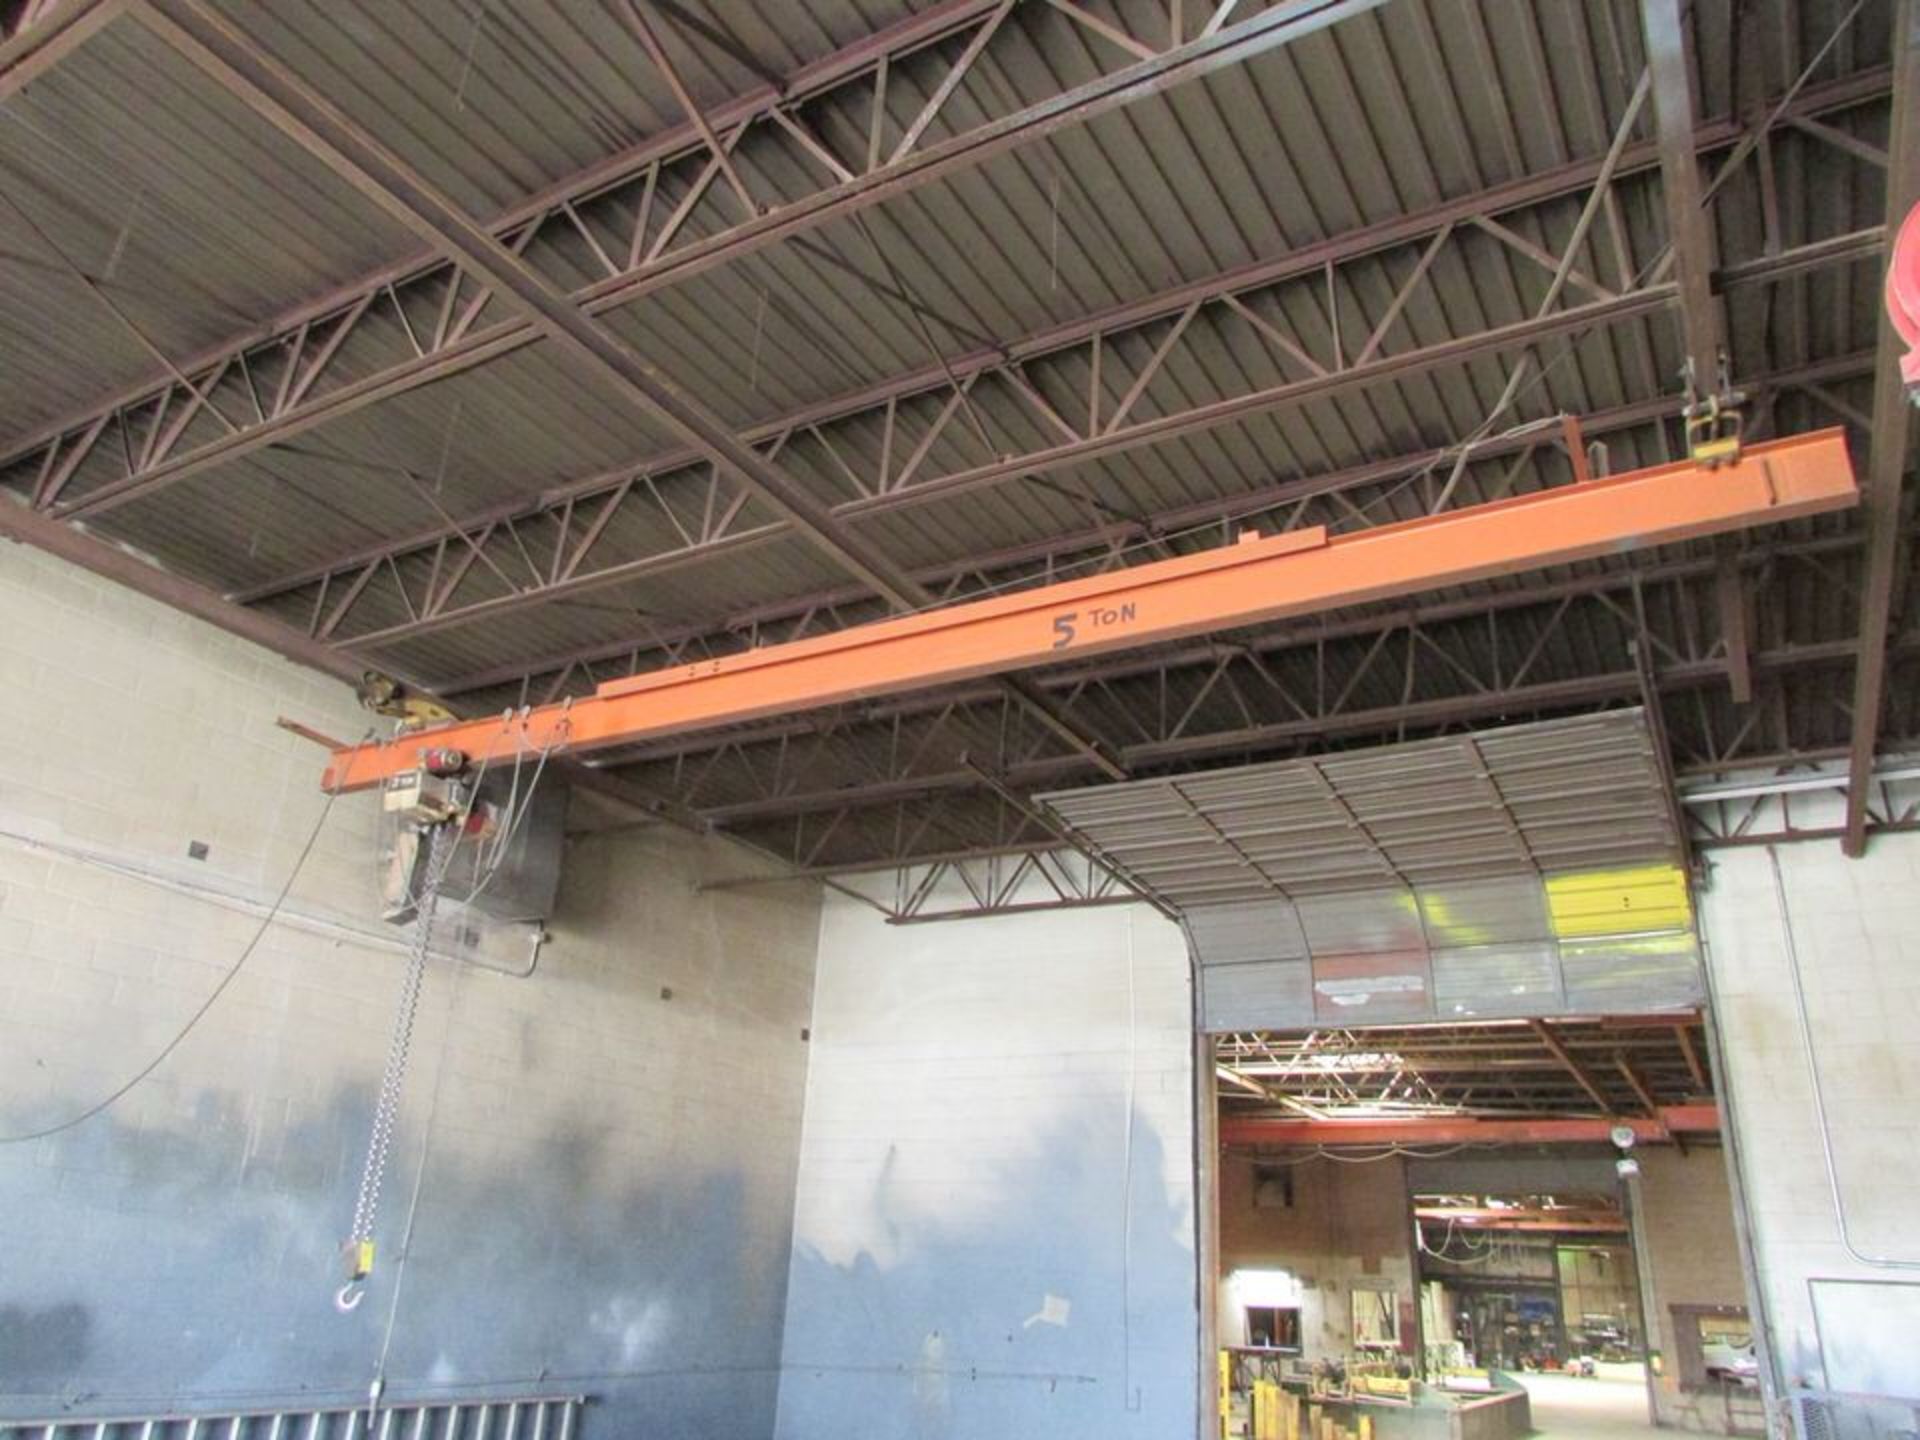 Approx. 30' Span Bridge Crane; With Coffing 3-Ton Electric Chain Hoist; Motorized I-Beam Trolley and